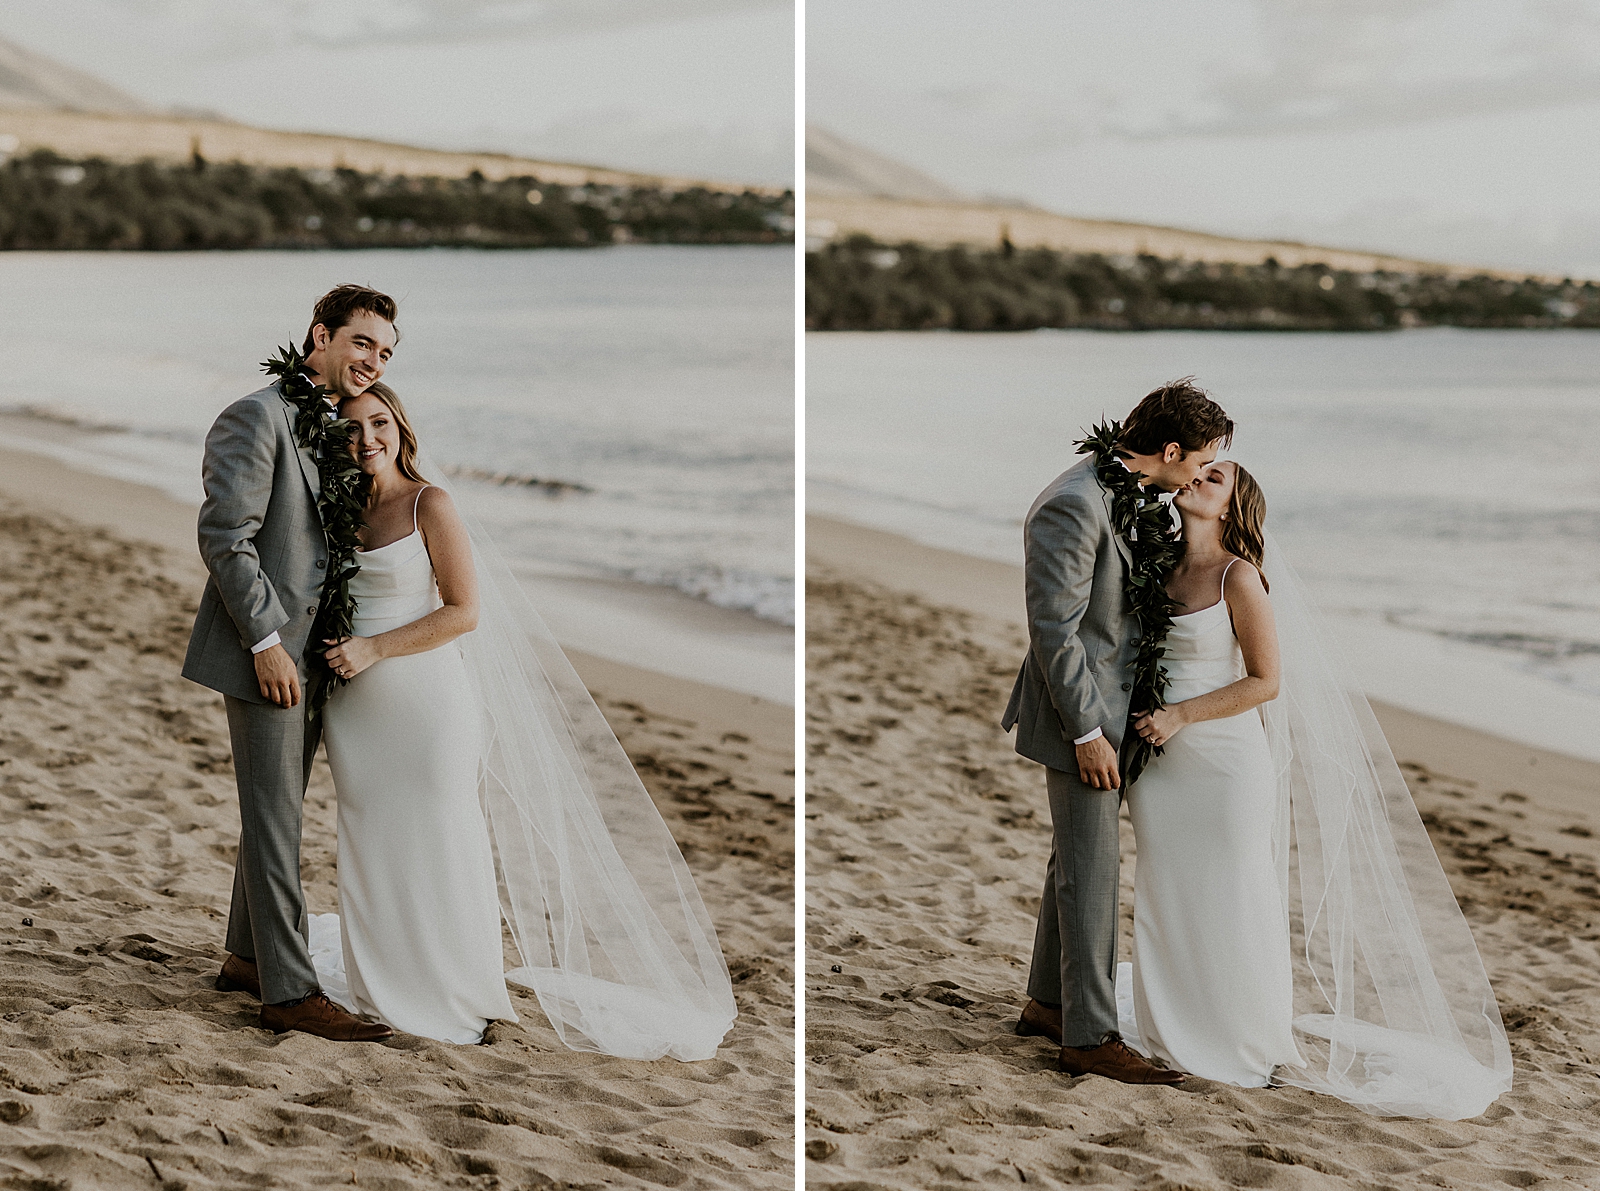 Bride and Groom side by side on the beach by the ocean